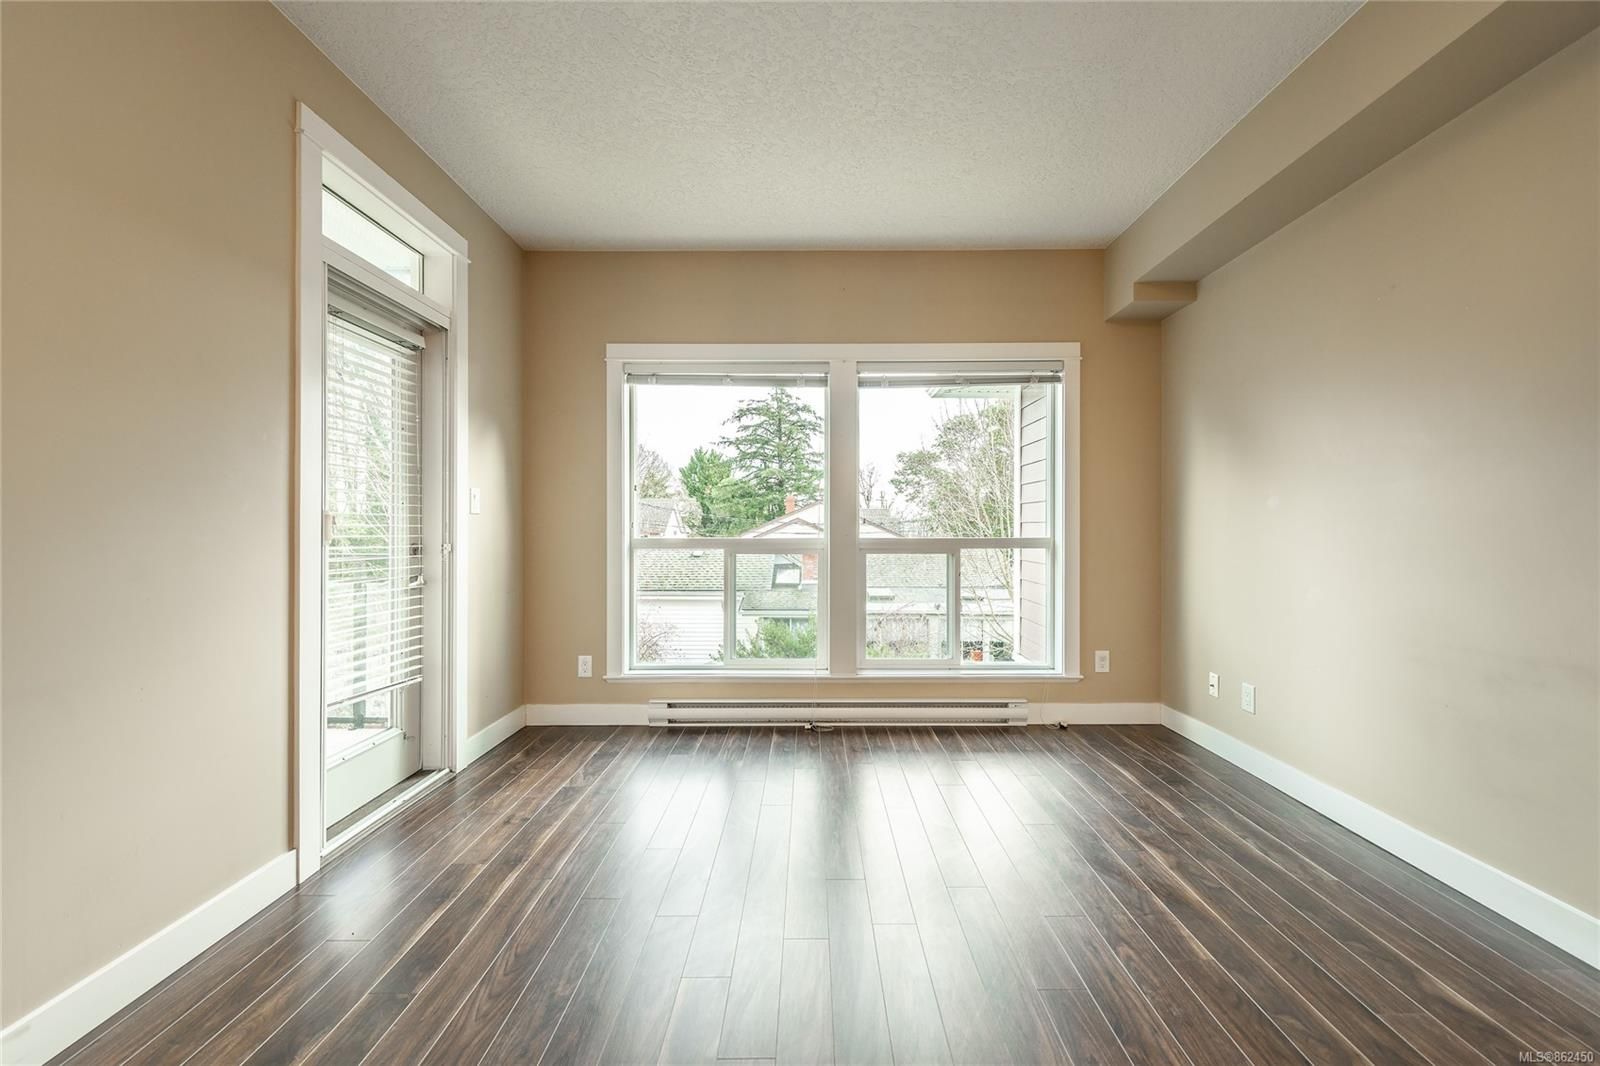 Photo 4: Photos: 204 938 Dunford Ave in Langford: La Langford Proper Condo for sale : MLS®# 862450